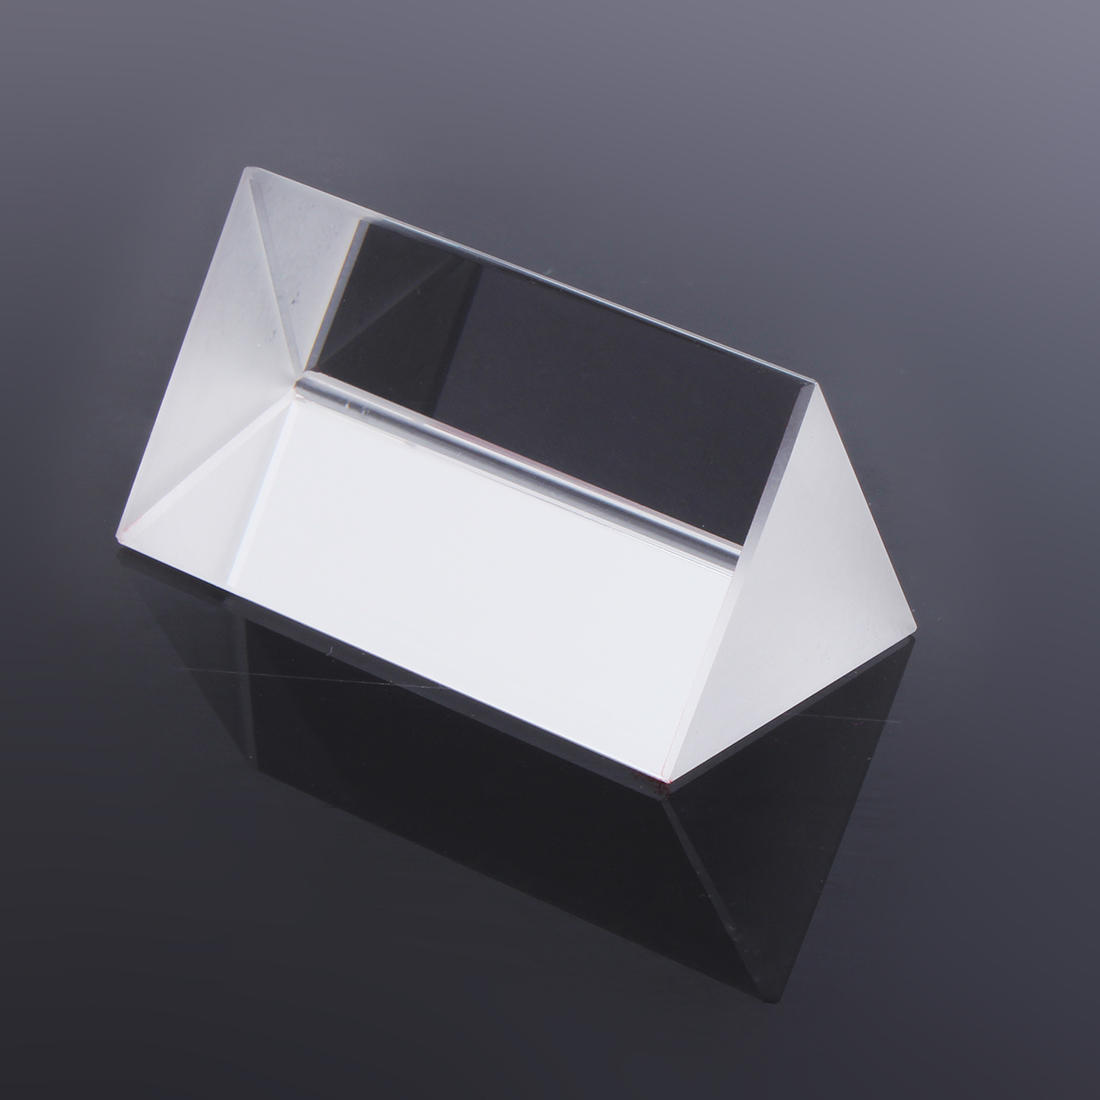 Optical Glass Triangle Prism for Teaching Spectral Physics and Photographic Prism Optical Glass Prism 